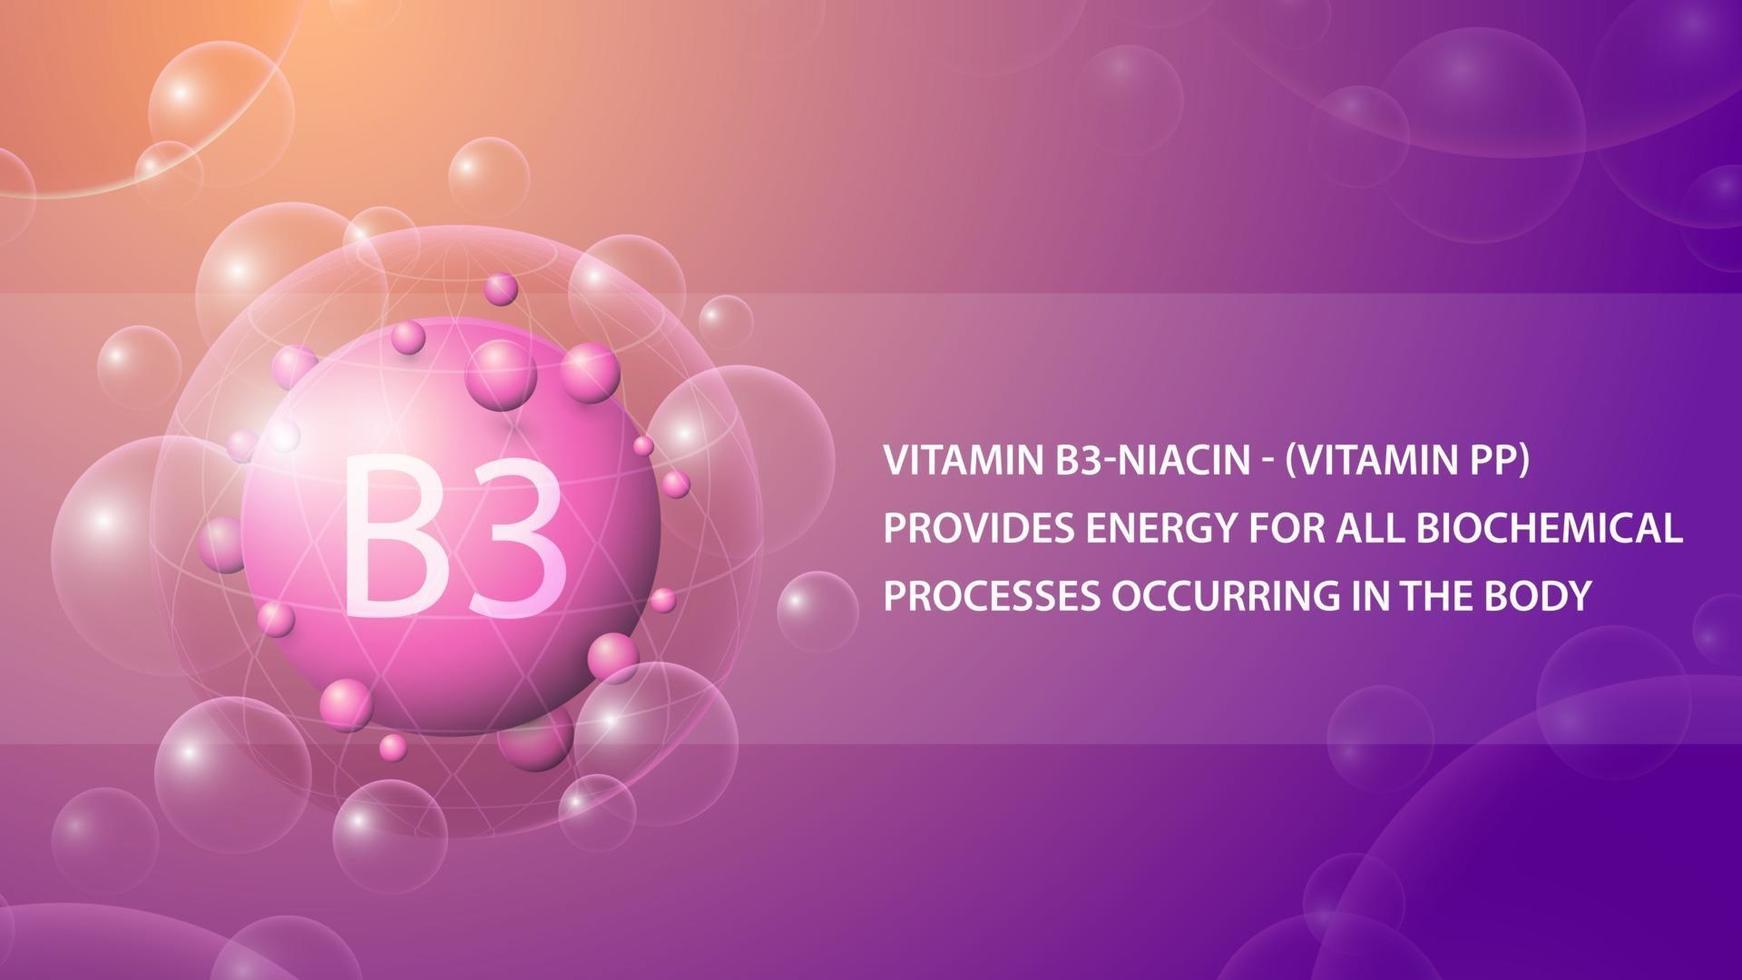 Vitamin B3, pink information poster with purple abstract medicine capsule vector